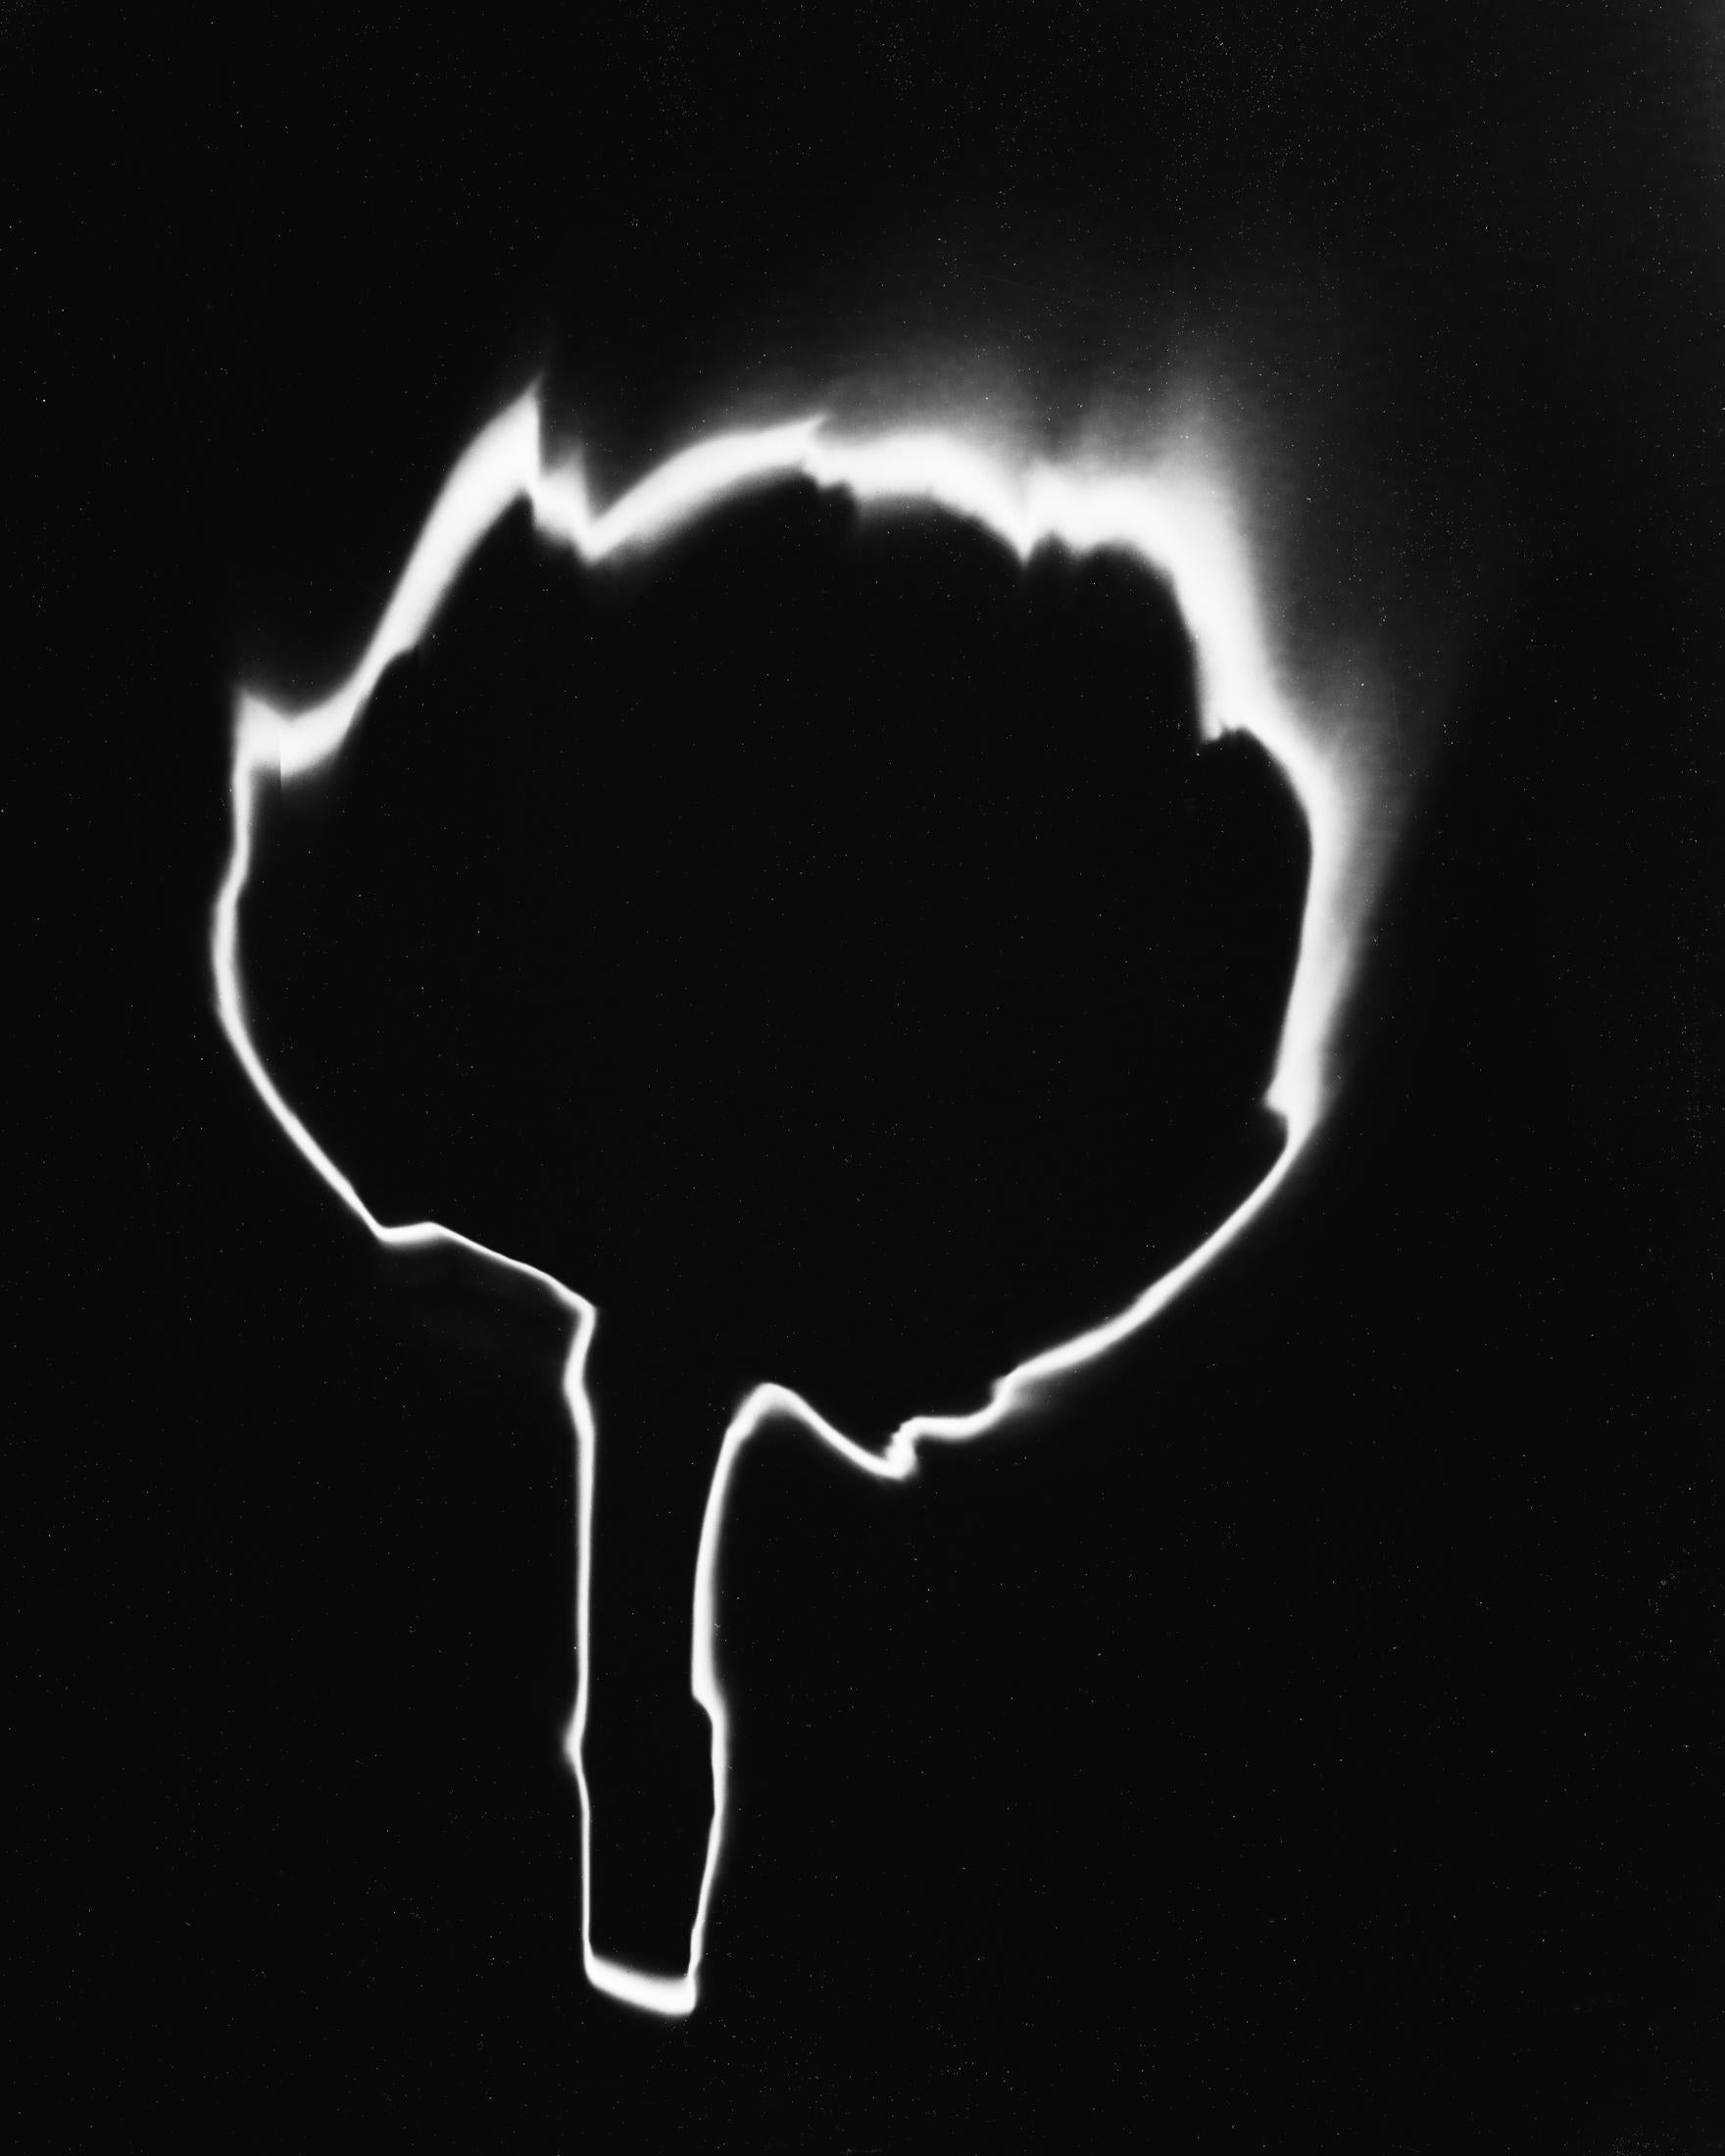 Artichoke I and II  Abstract.  Black and White Silver Gelatin Print - Minimalist Photograph by Shine Huang